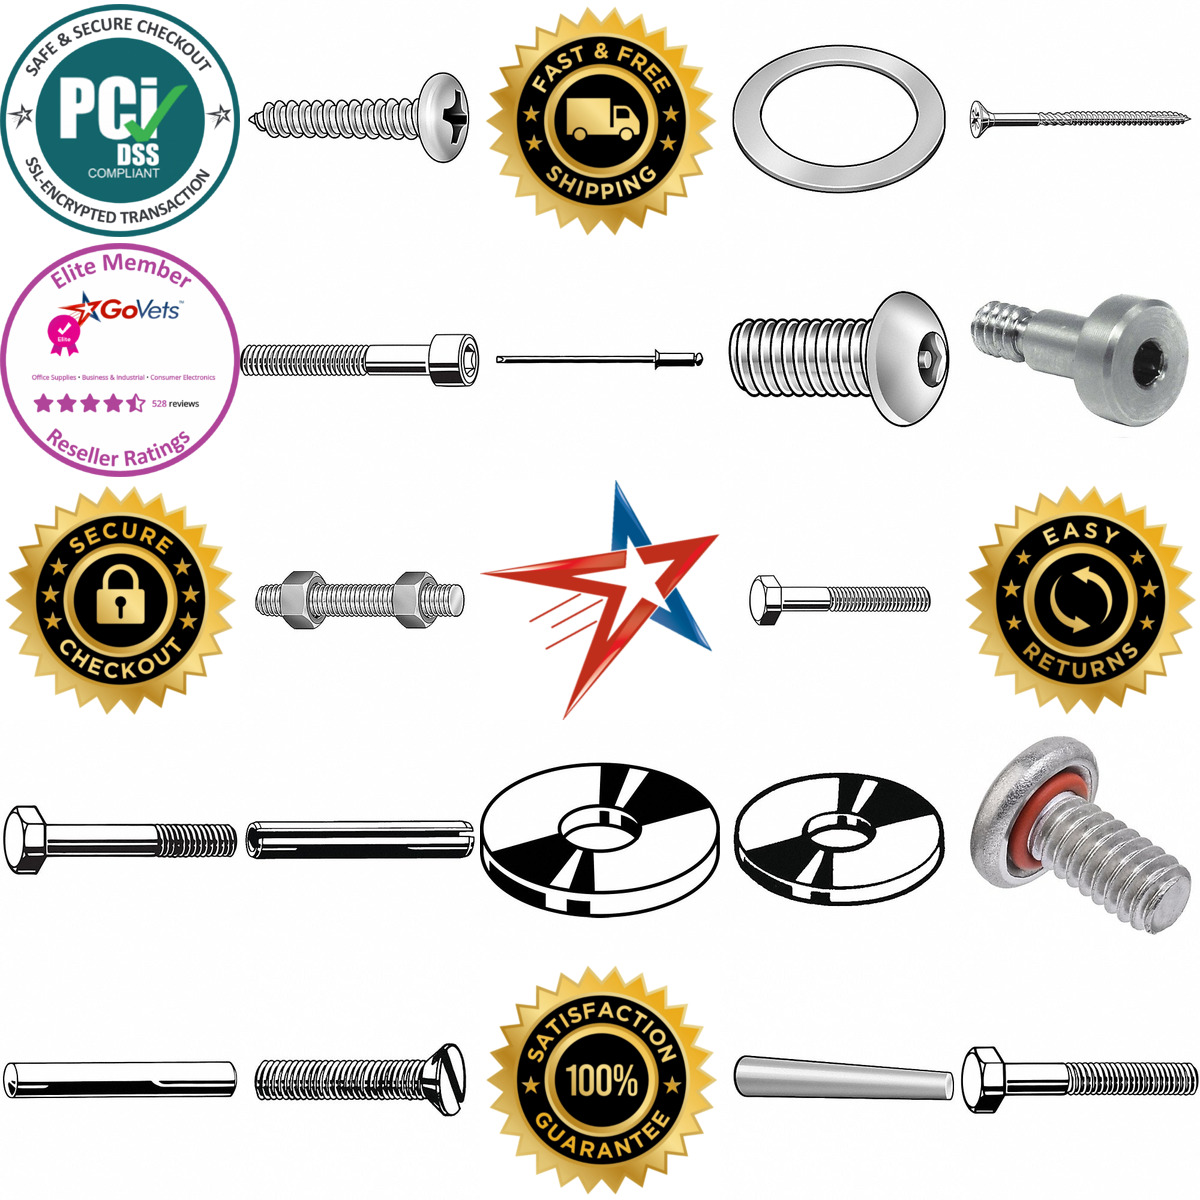 A selection of Fasteners products on GoVets